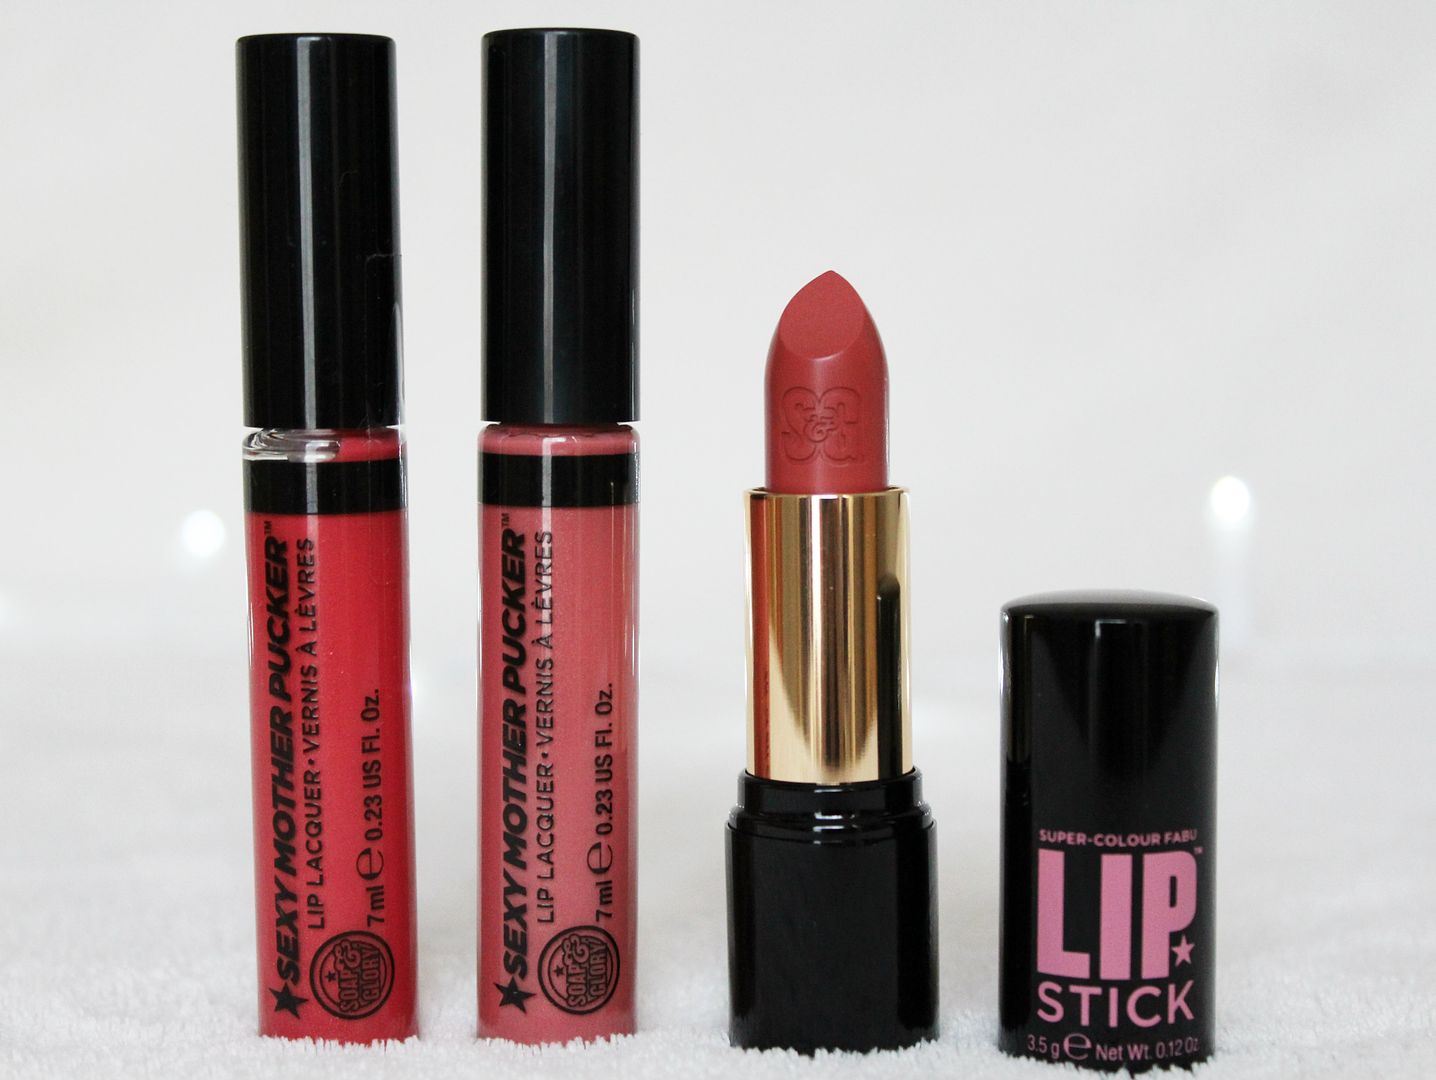 Soap And Glory Beauty Haul Winter 2015 Sexy Mother Pucker Lip Lacquer In Whatchama-Coral Charm Offensive Super Colour Fabu Lipstick In Perfect Day Belle-Amie UK Beauty Fashion Lifestyle Blog